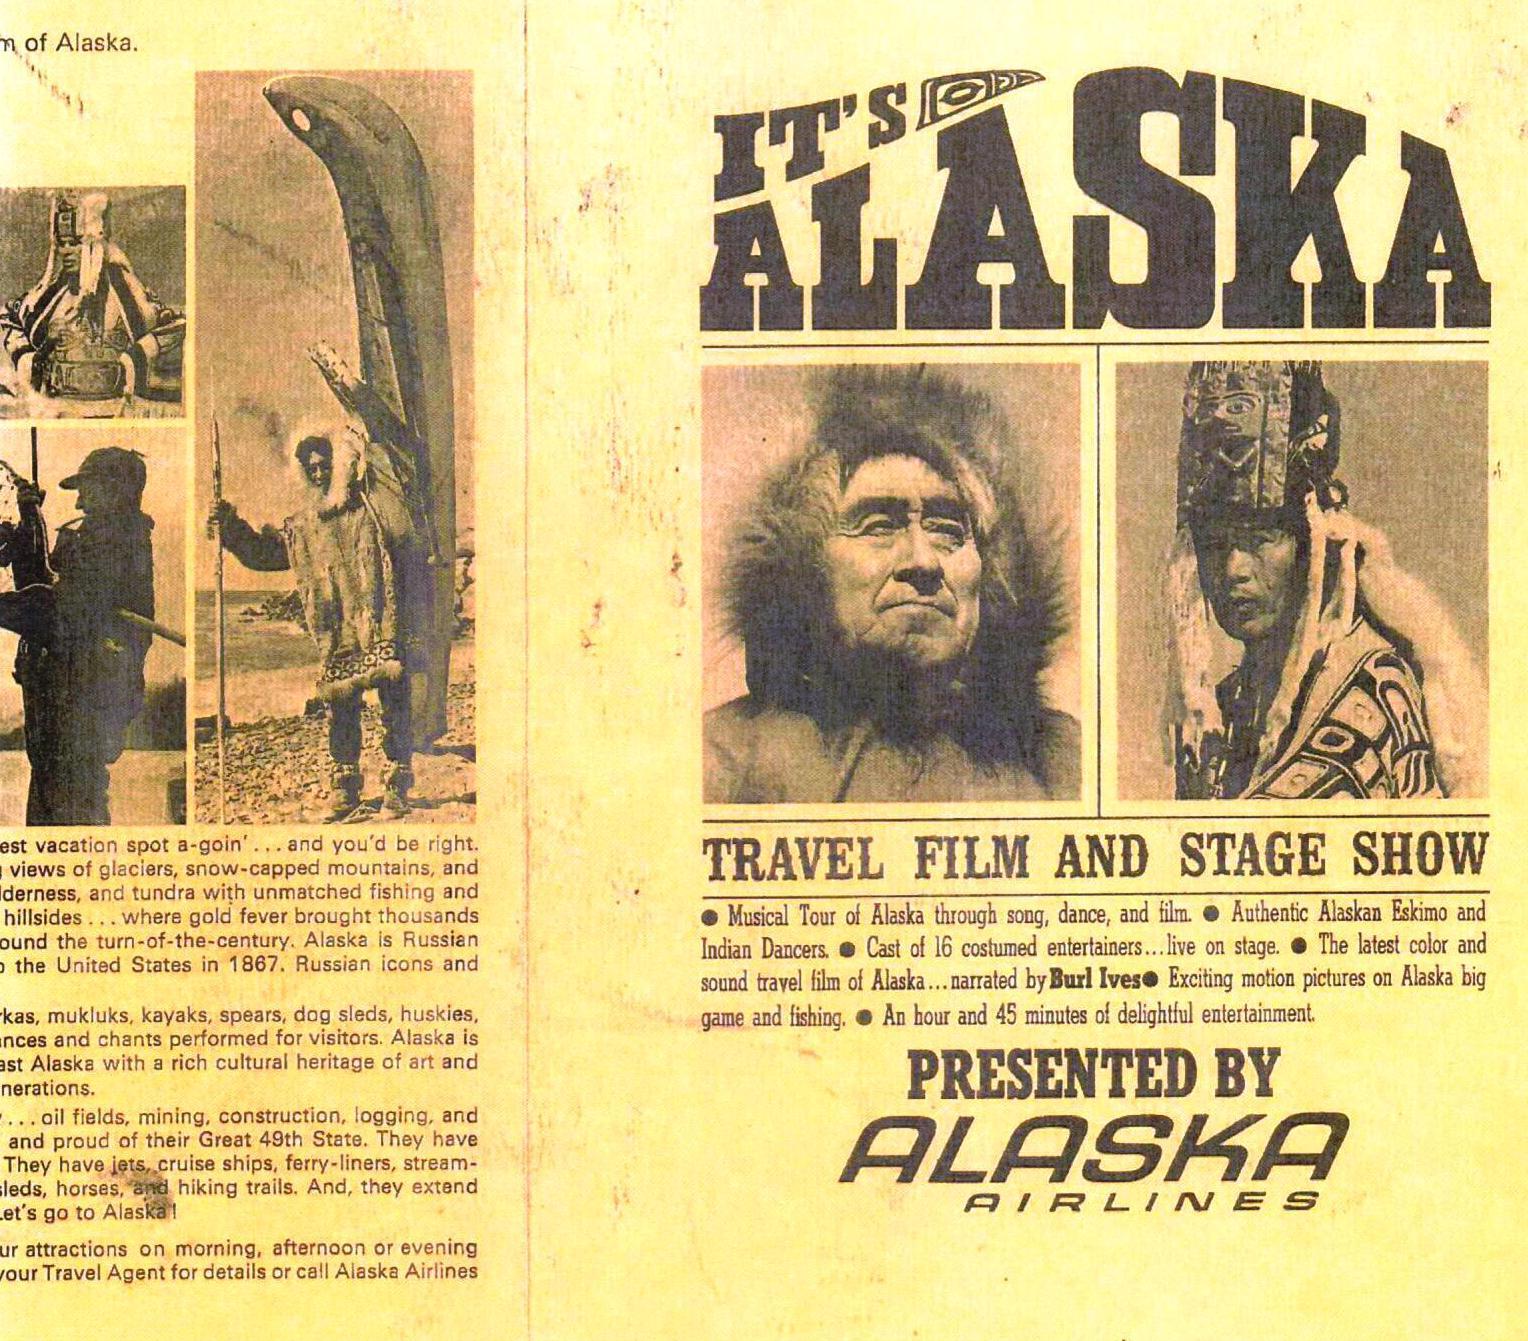 Alaska Airlines Old Logo - The story of the Eskimo: Who is on the tail of Alaska Airlines